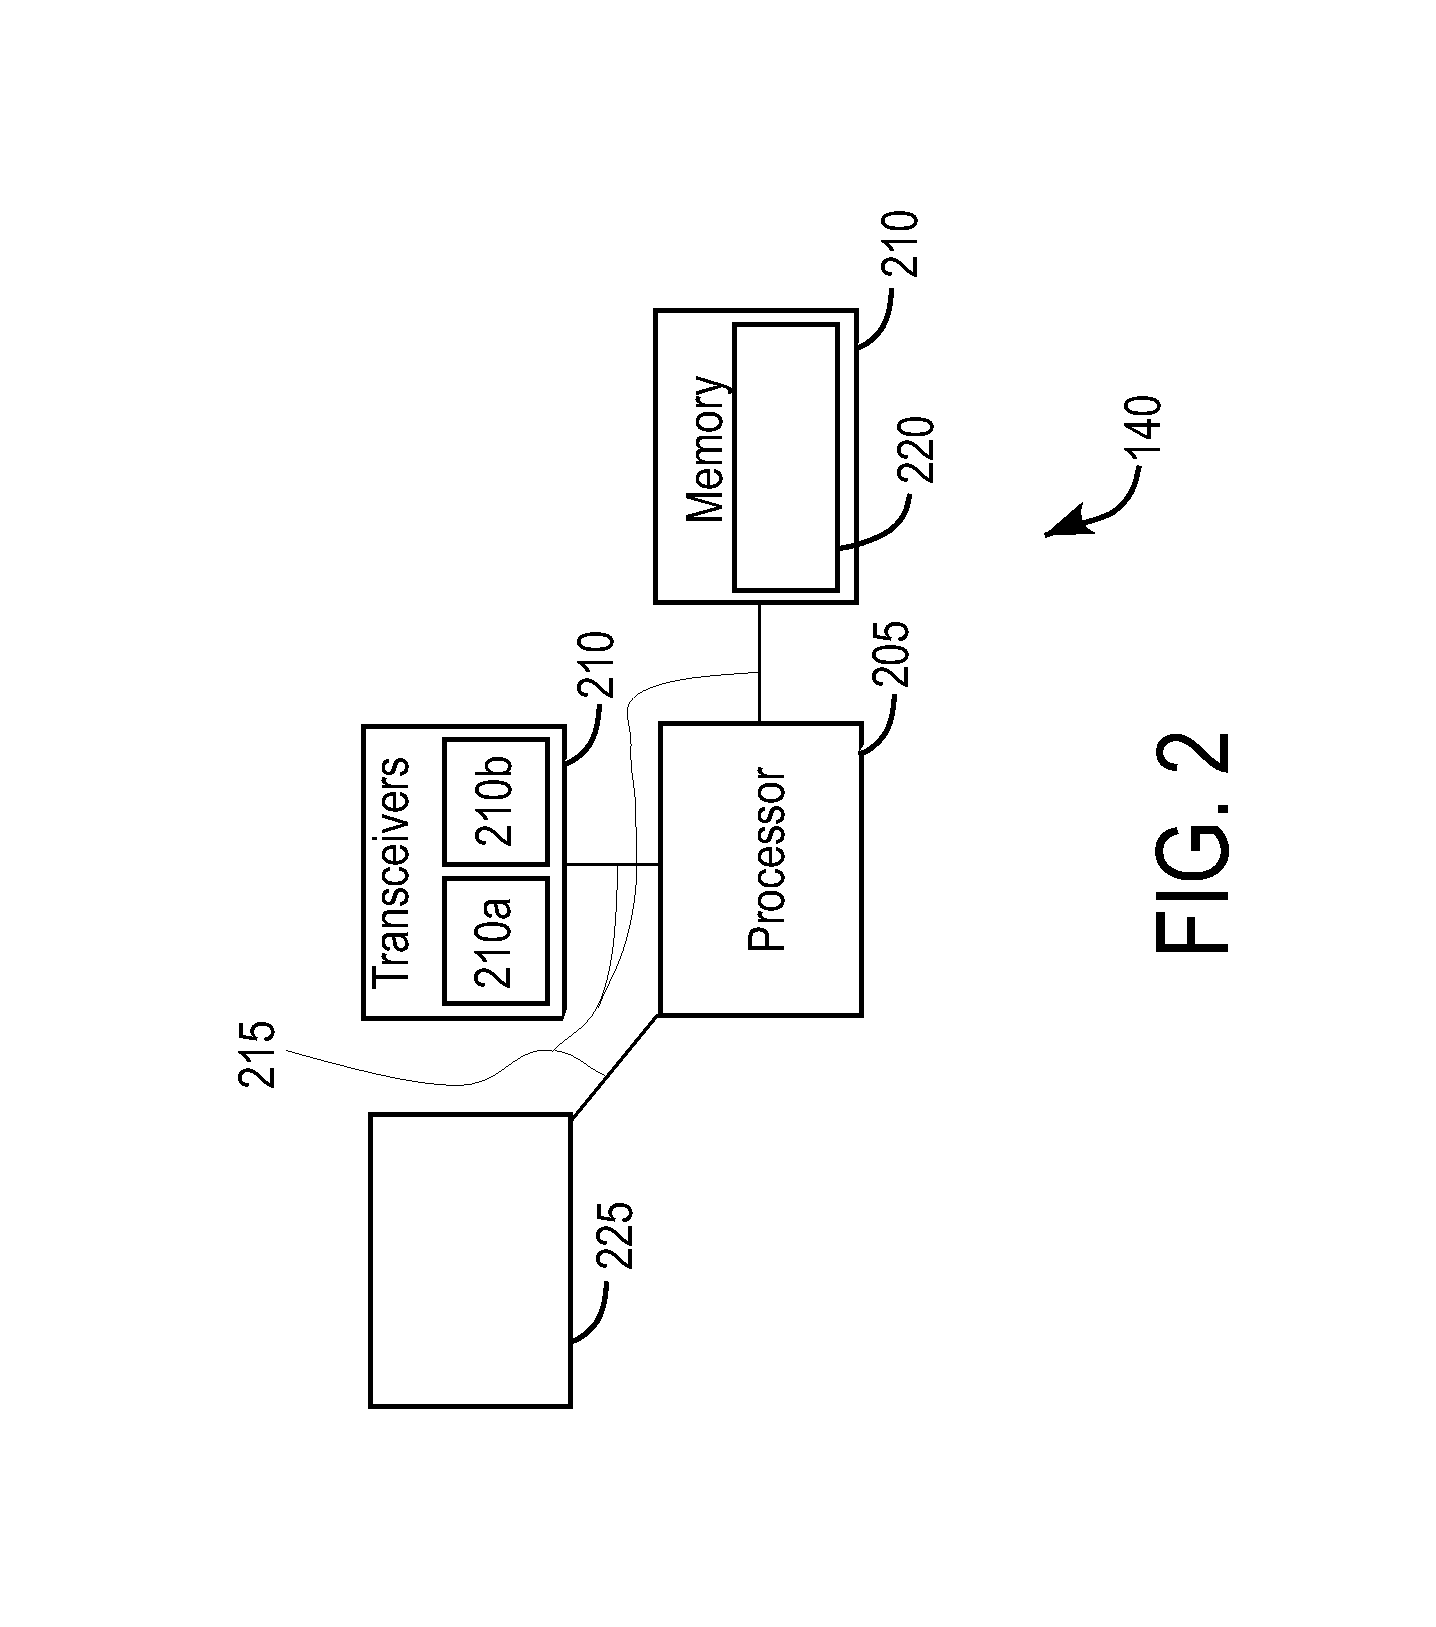 Apparatus and method for configuration and operation of a remote-control system